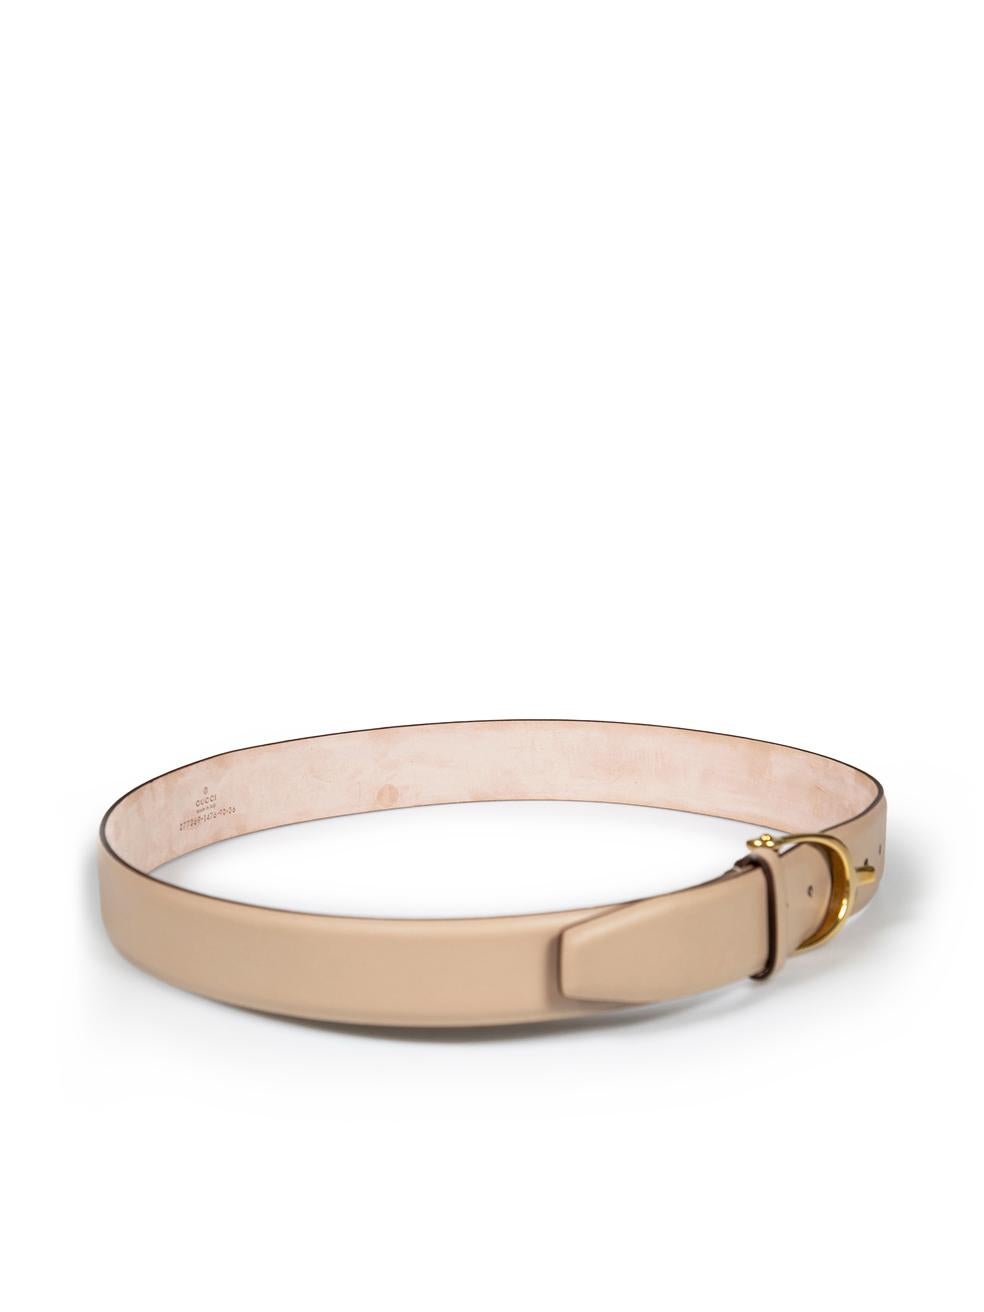 CONDITION is Very good. Minimal wear to belt is evident. Minimal wear to the front and back with light marks to the leather on this used Gucci designer resale item. This belt comes with original dust bag.
 
 
 
 Details
 
 
 Beige
 
 Leather
 
